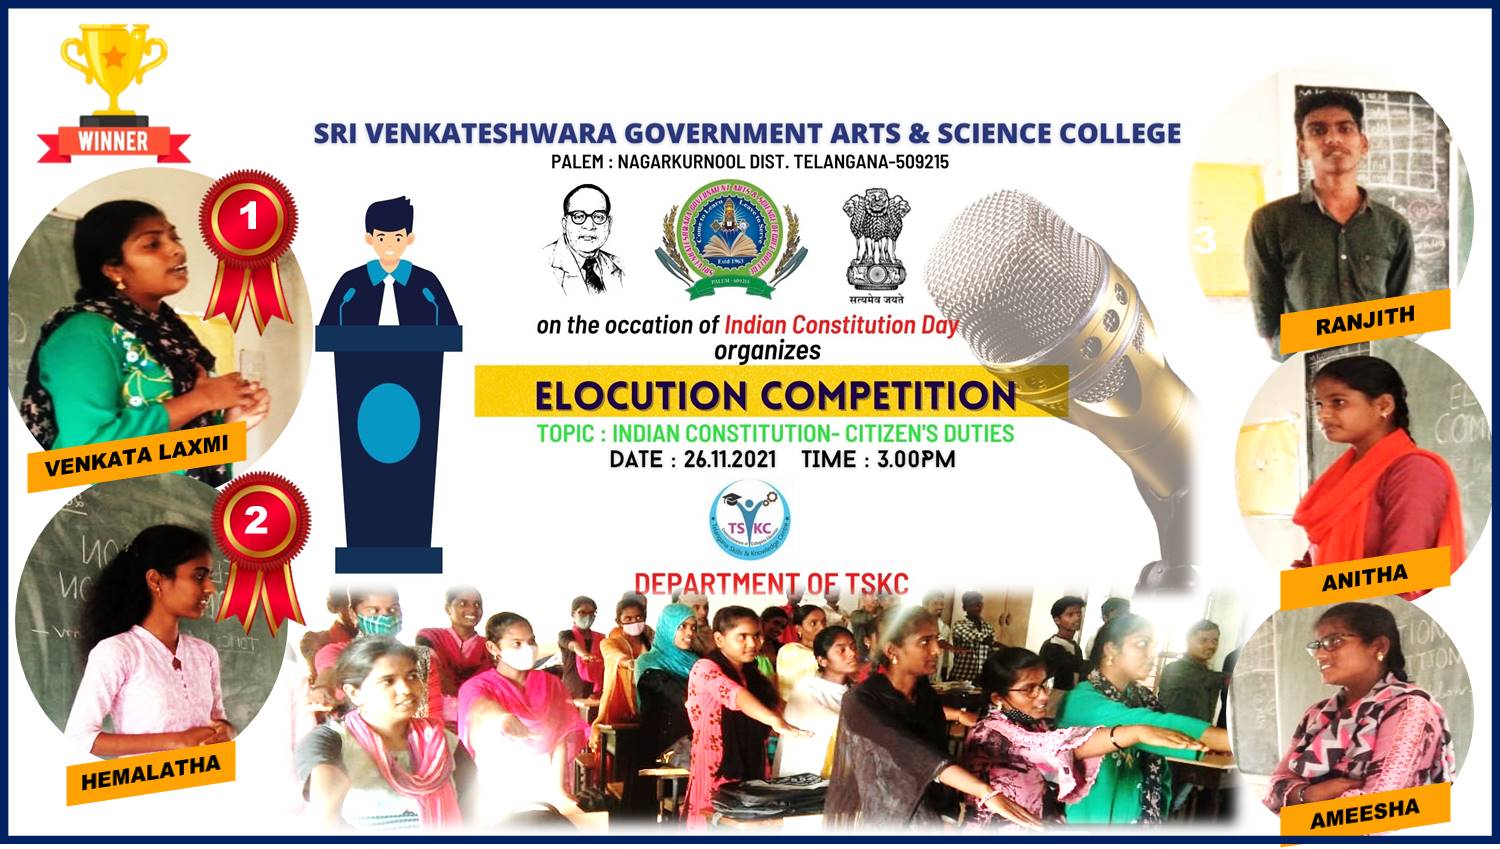 Elocution Competition -26.11.2021 